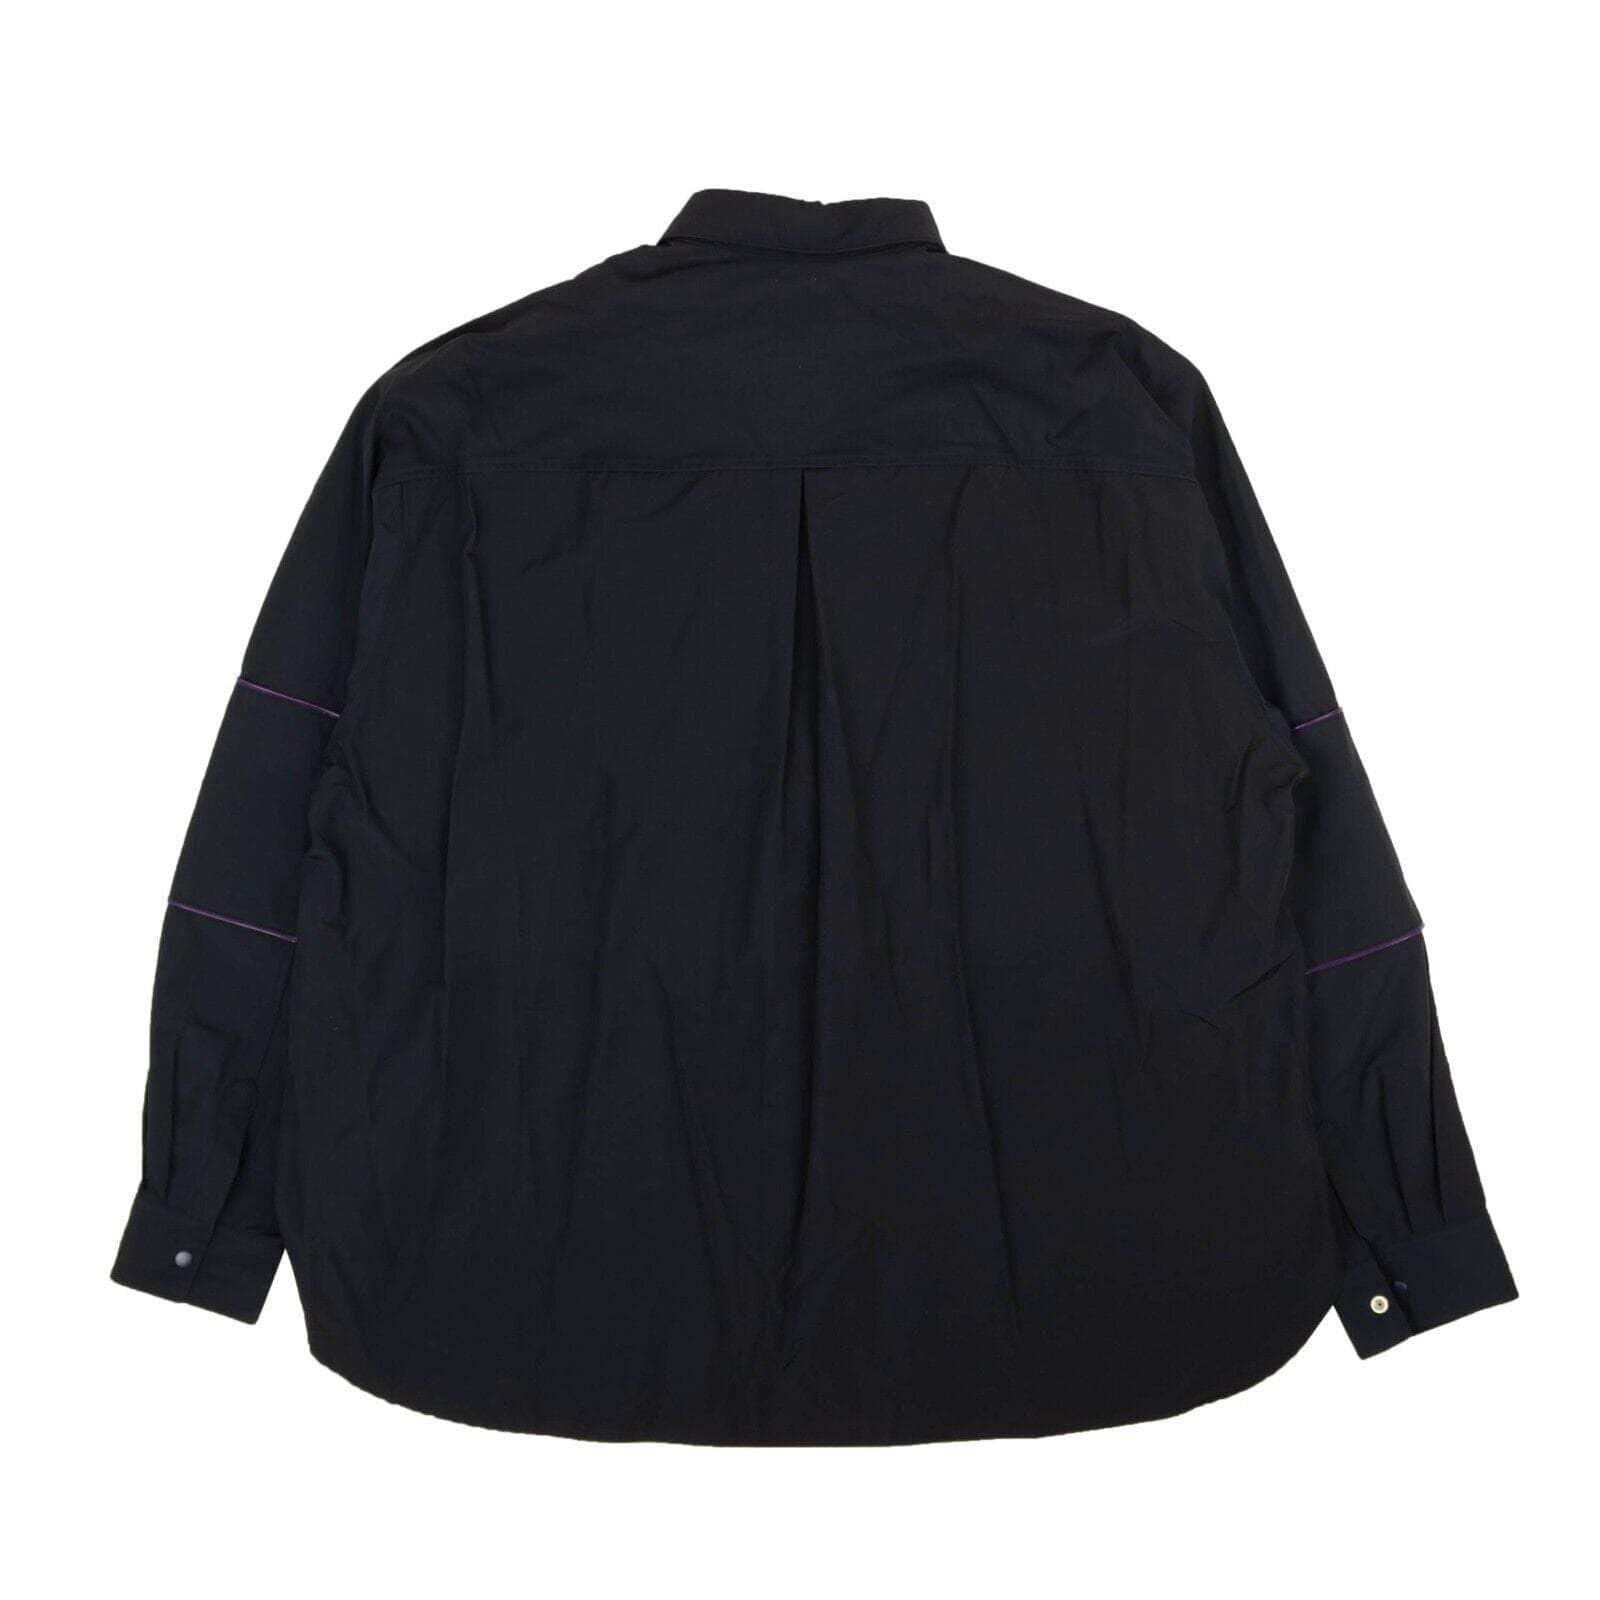 Name channelenable-all, chicmi, couponcollection, gender-mens, main-clothing, mens-shoes, name, size-3, under-250 3 Navy Blue Snap Front Overshirt 95-NME-1008/3 95-NME-1008/3